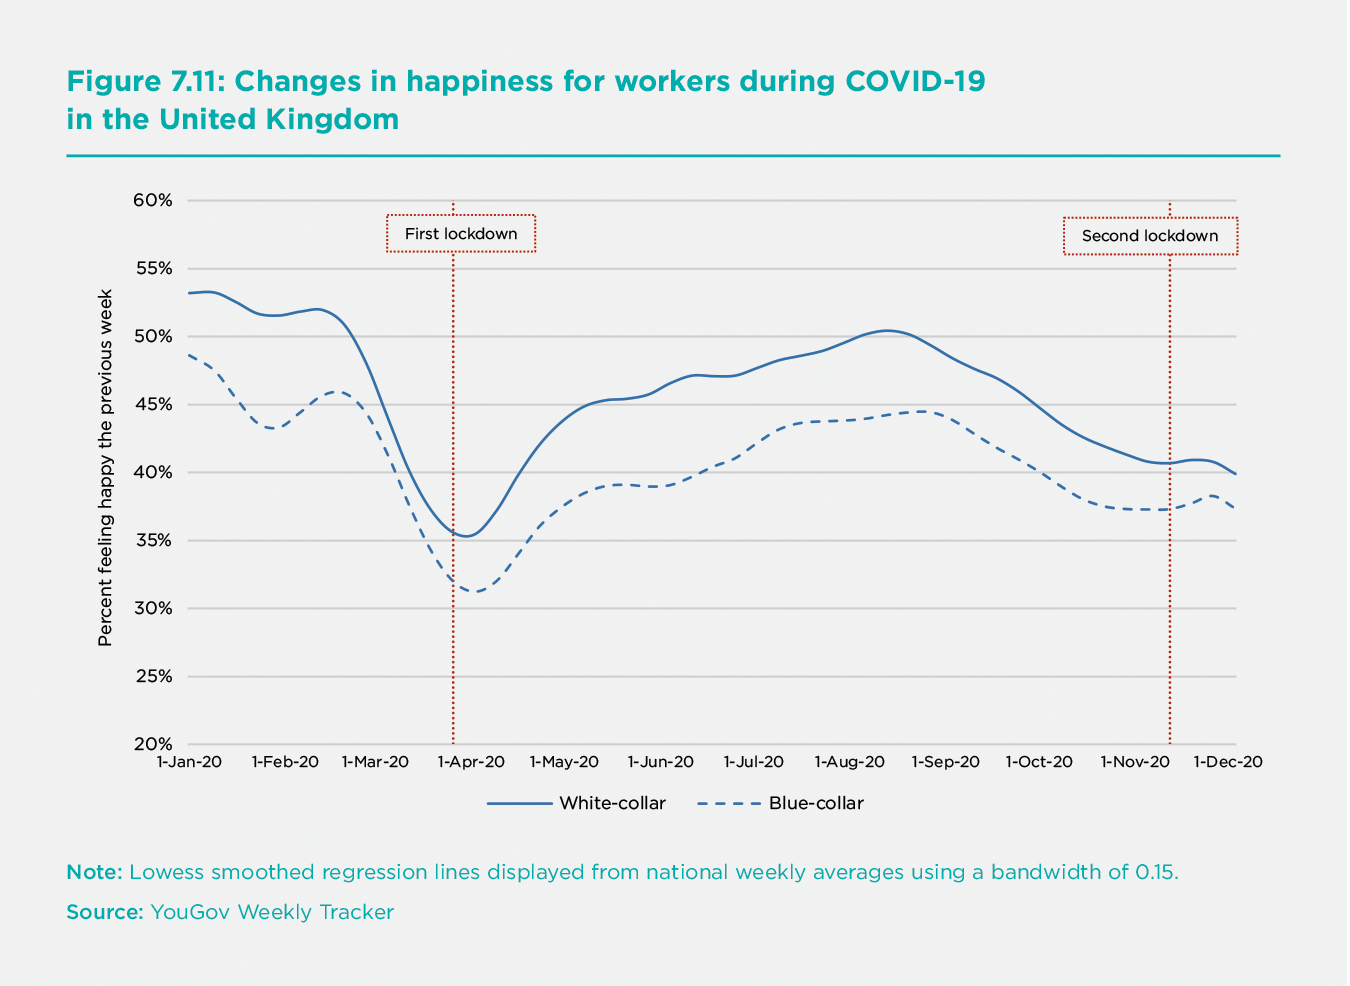 Figure 7.11: Changes in happiness for workers during COVID-19 in the United Kingdom